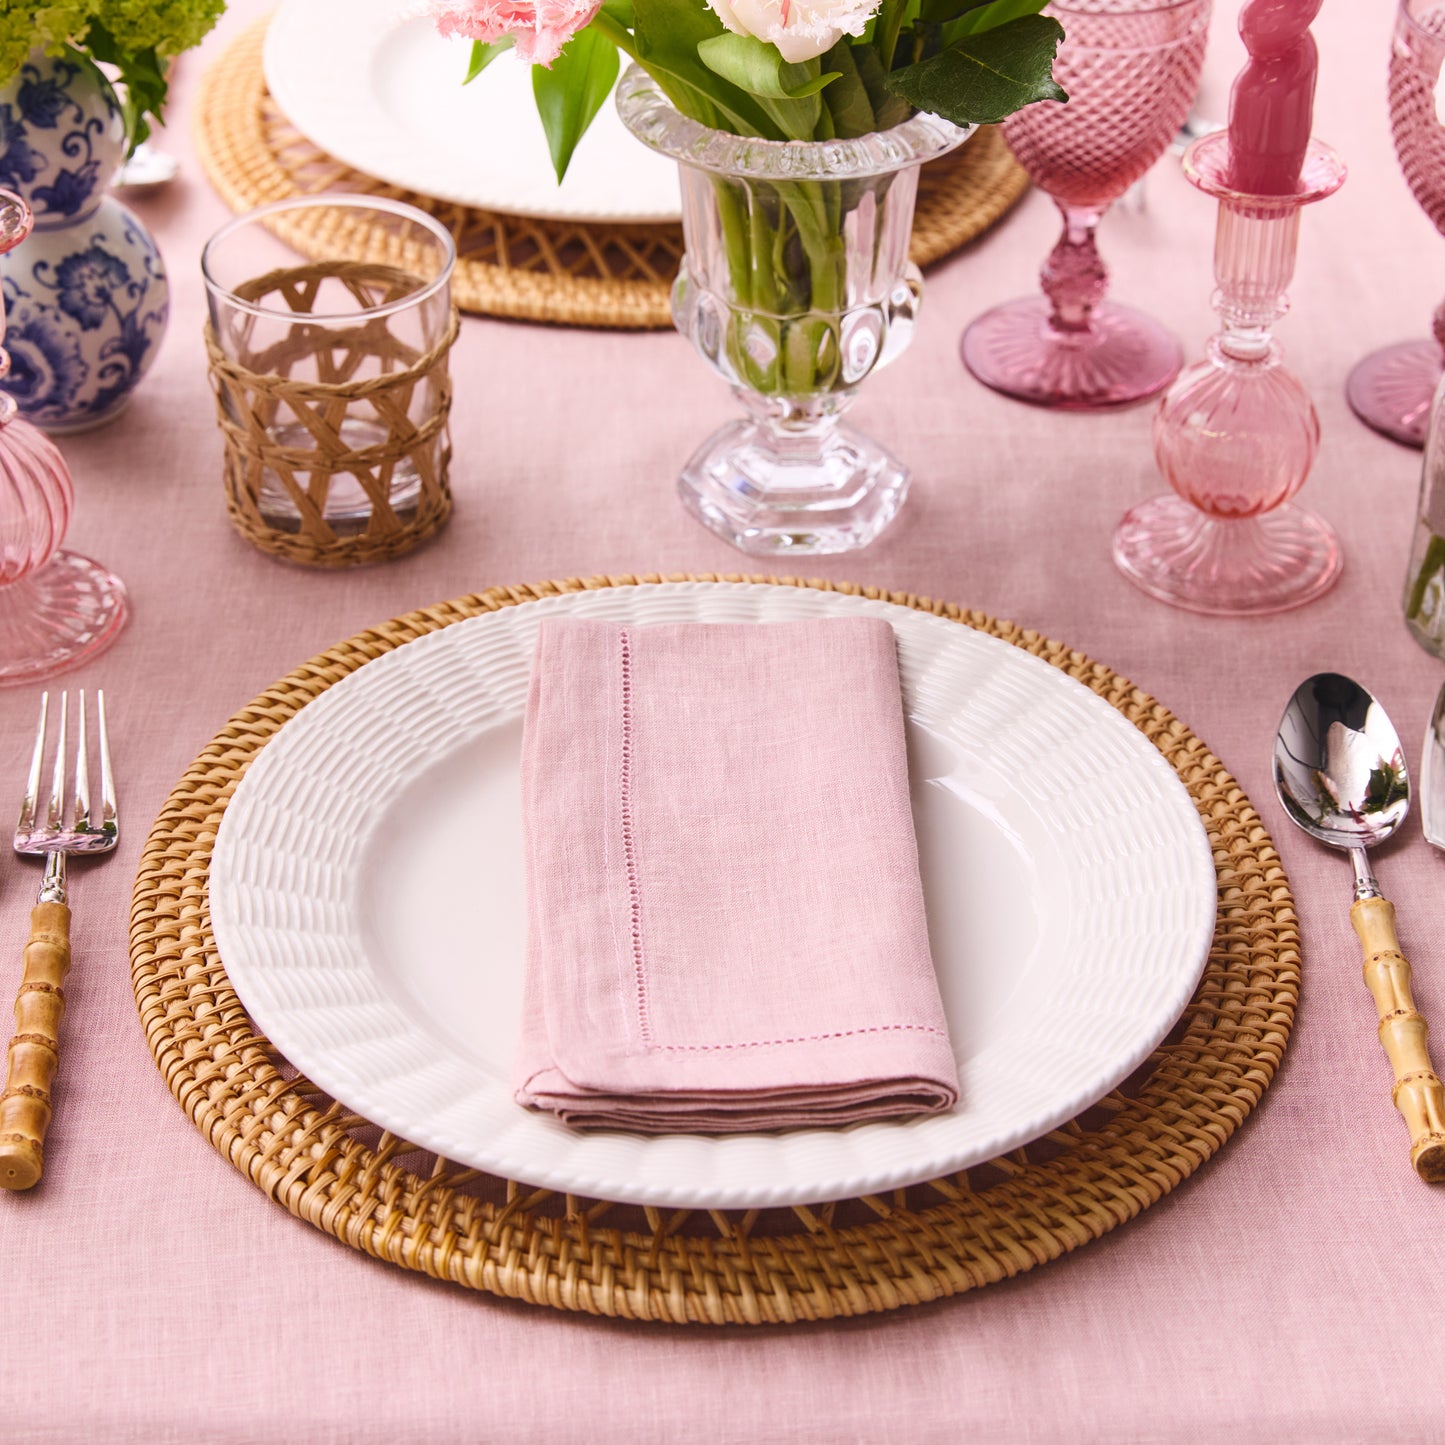 Linen Tablecloth with Hemstitched Edge - Dusty Pink - 6-8 person table size